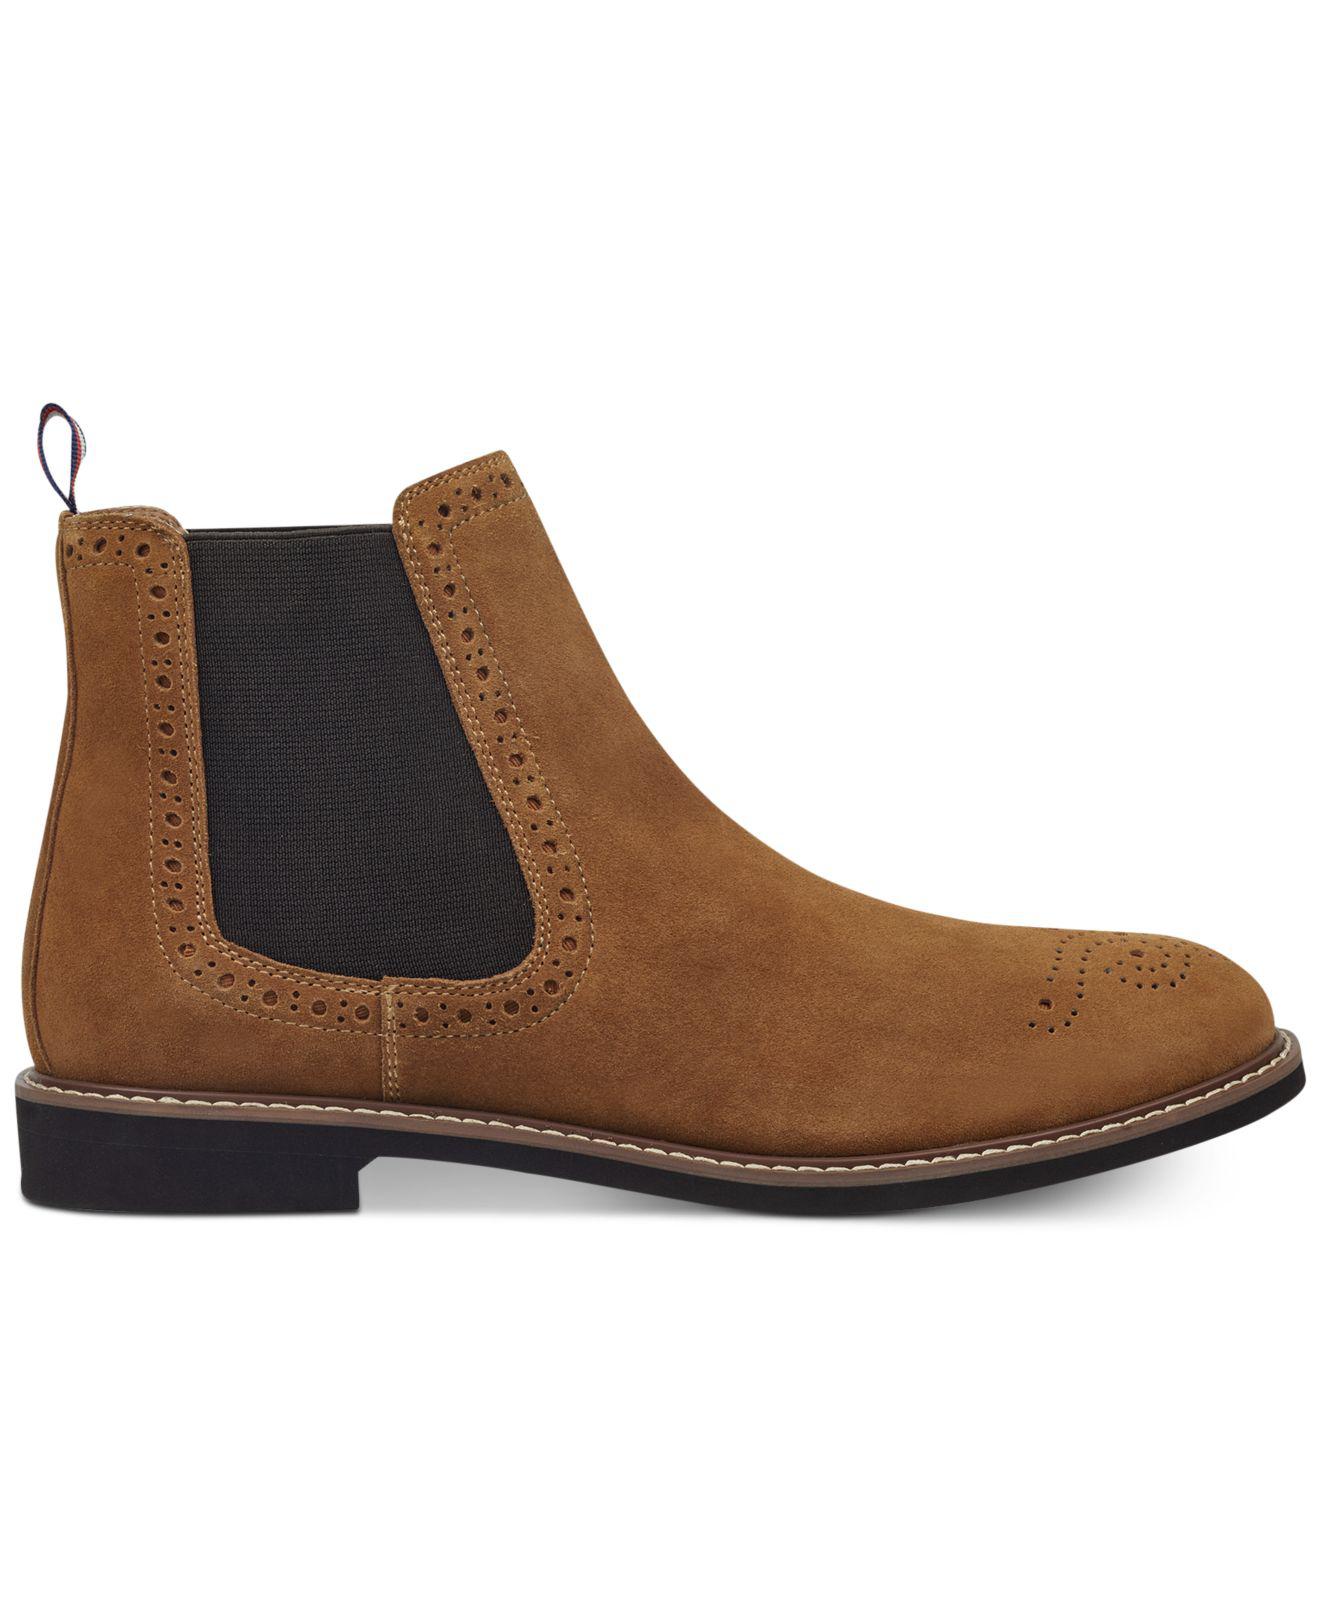 Tommy Hilfiger Gainer Suede Chelsea Boots in Brown for Men - Lyst